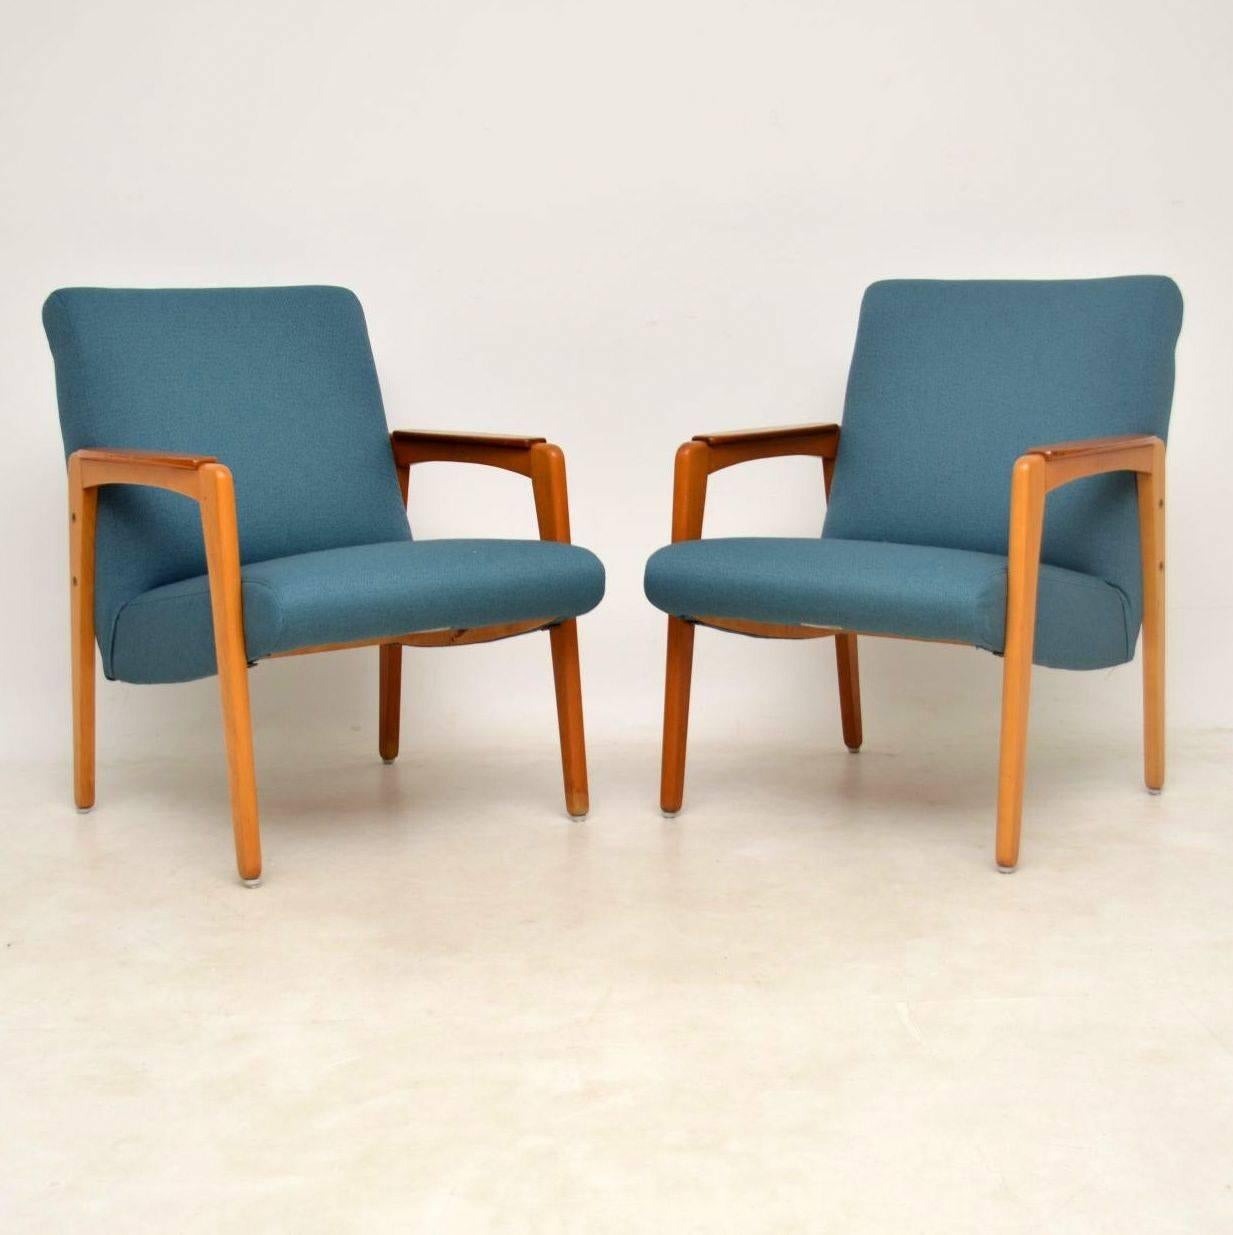 A stunning pair of vintage armchairs in teak, these were made in Sweden by Triva, they date from the 1950-1960s. They are in superb condition for their age and are very comfortable. The teak frames are clean, sturdy and sound and we have had these